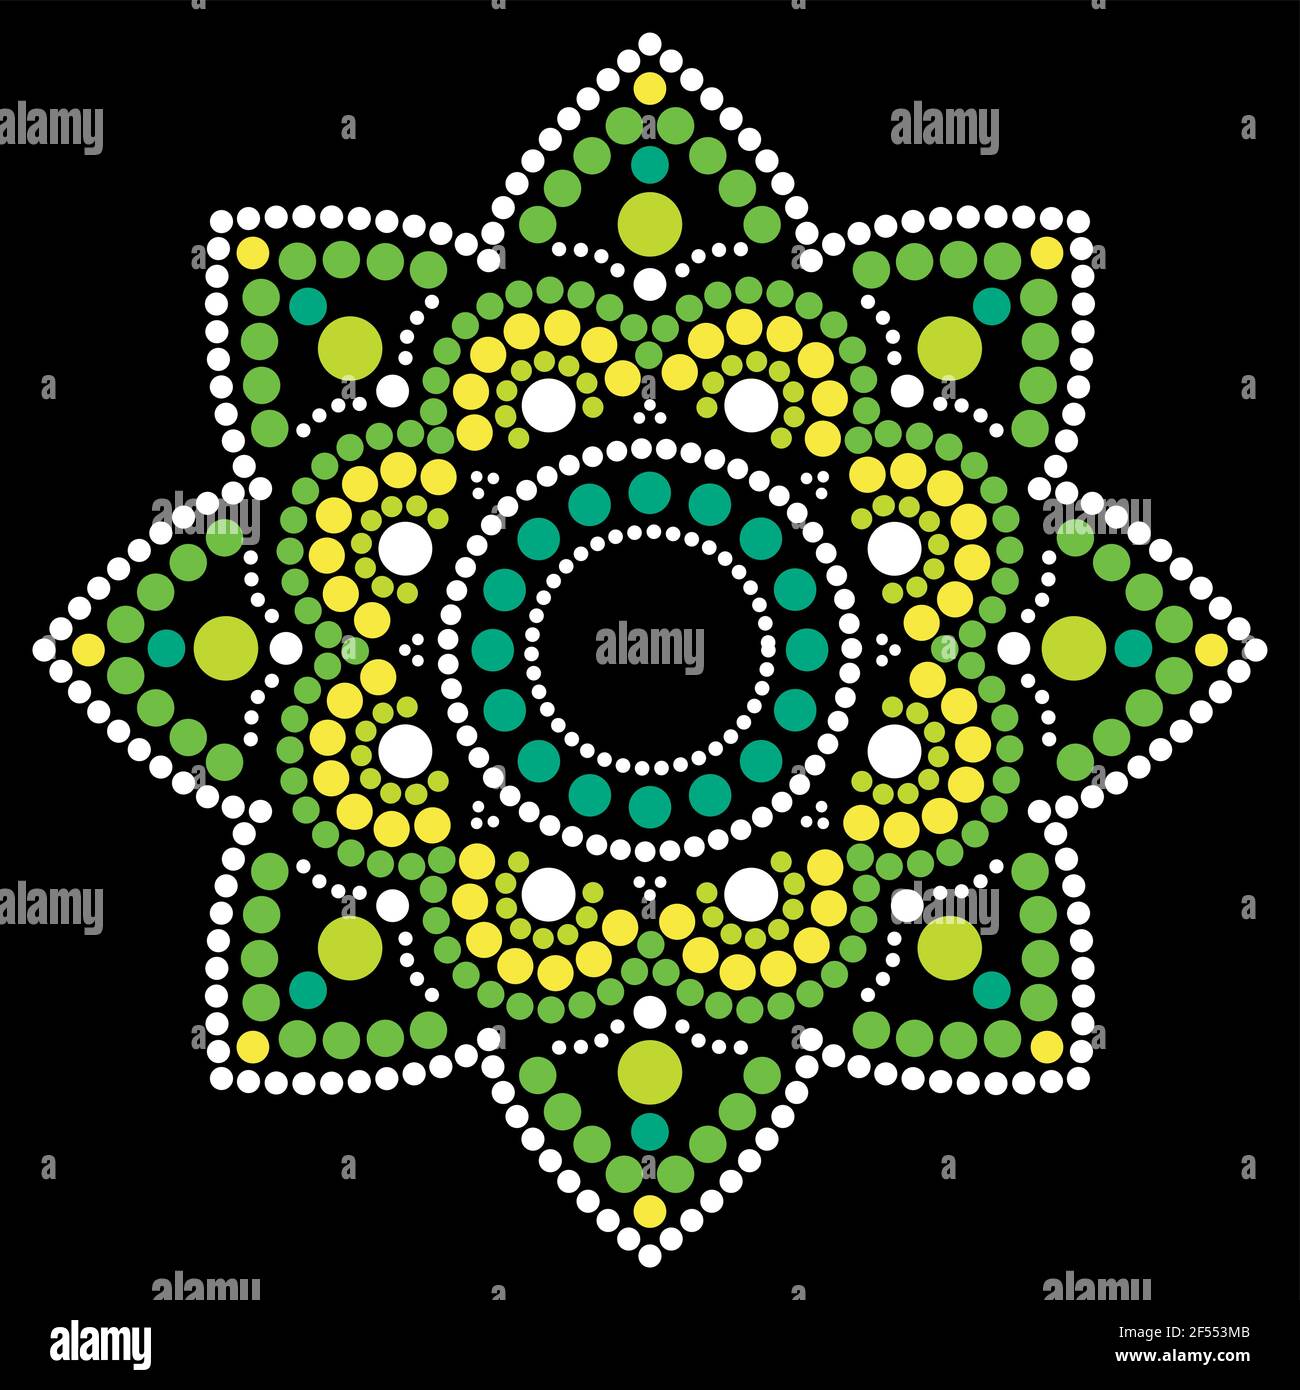 Dot painting vector ethnic mandala, traditional Aboriginal dot painting design, ethnic floral decoration from Australia Stock Vector